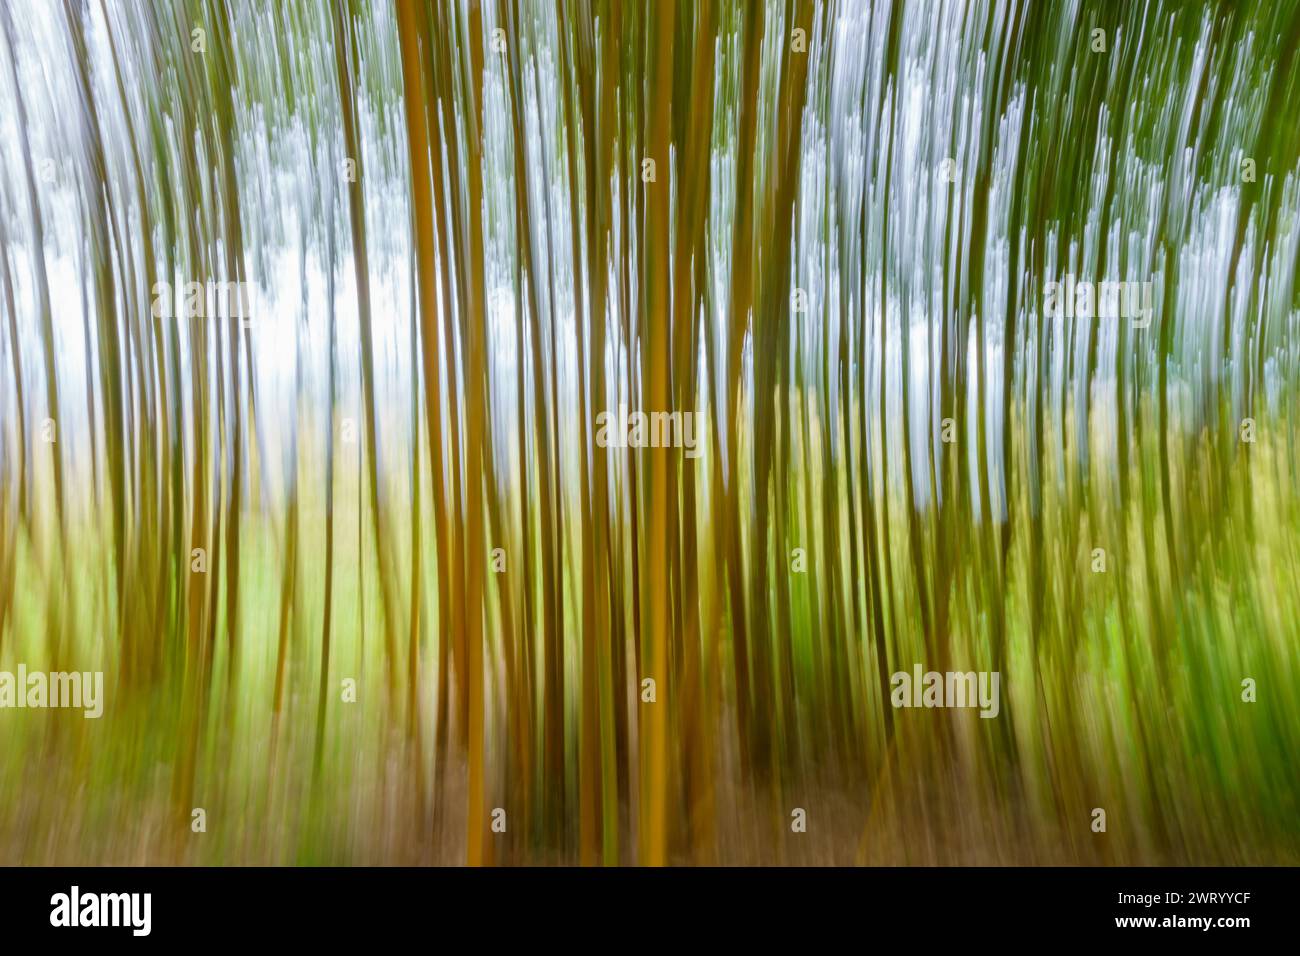 Nature abstract images of bamboo vertical blurs. Stock Photo